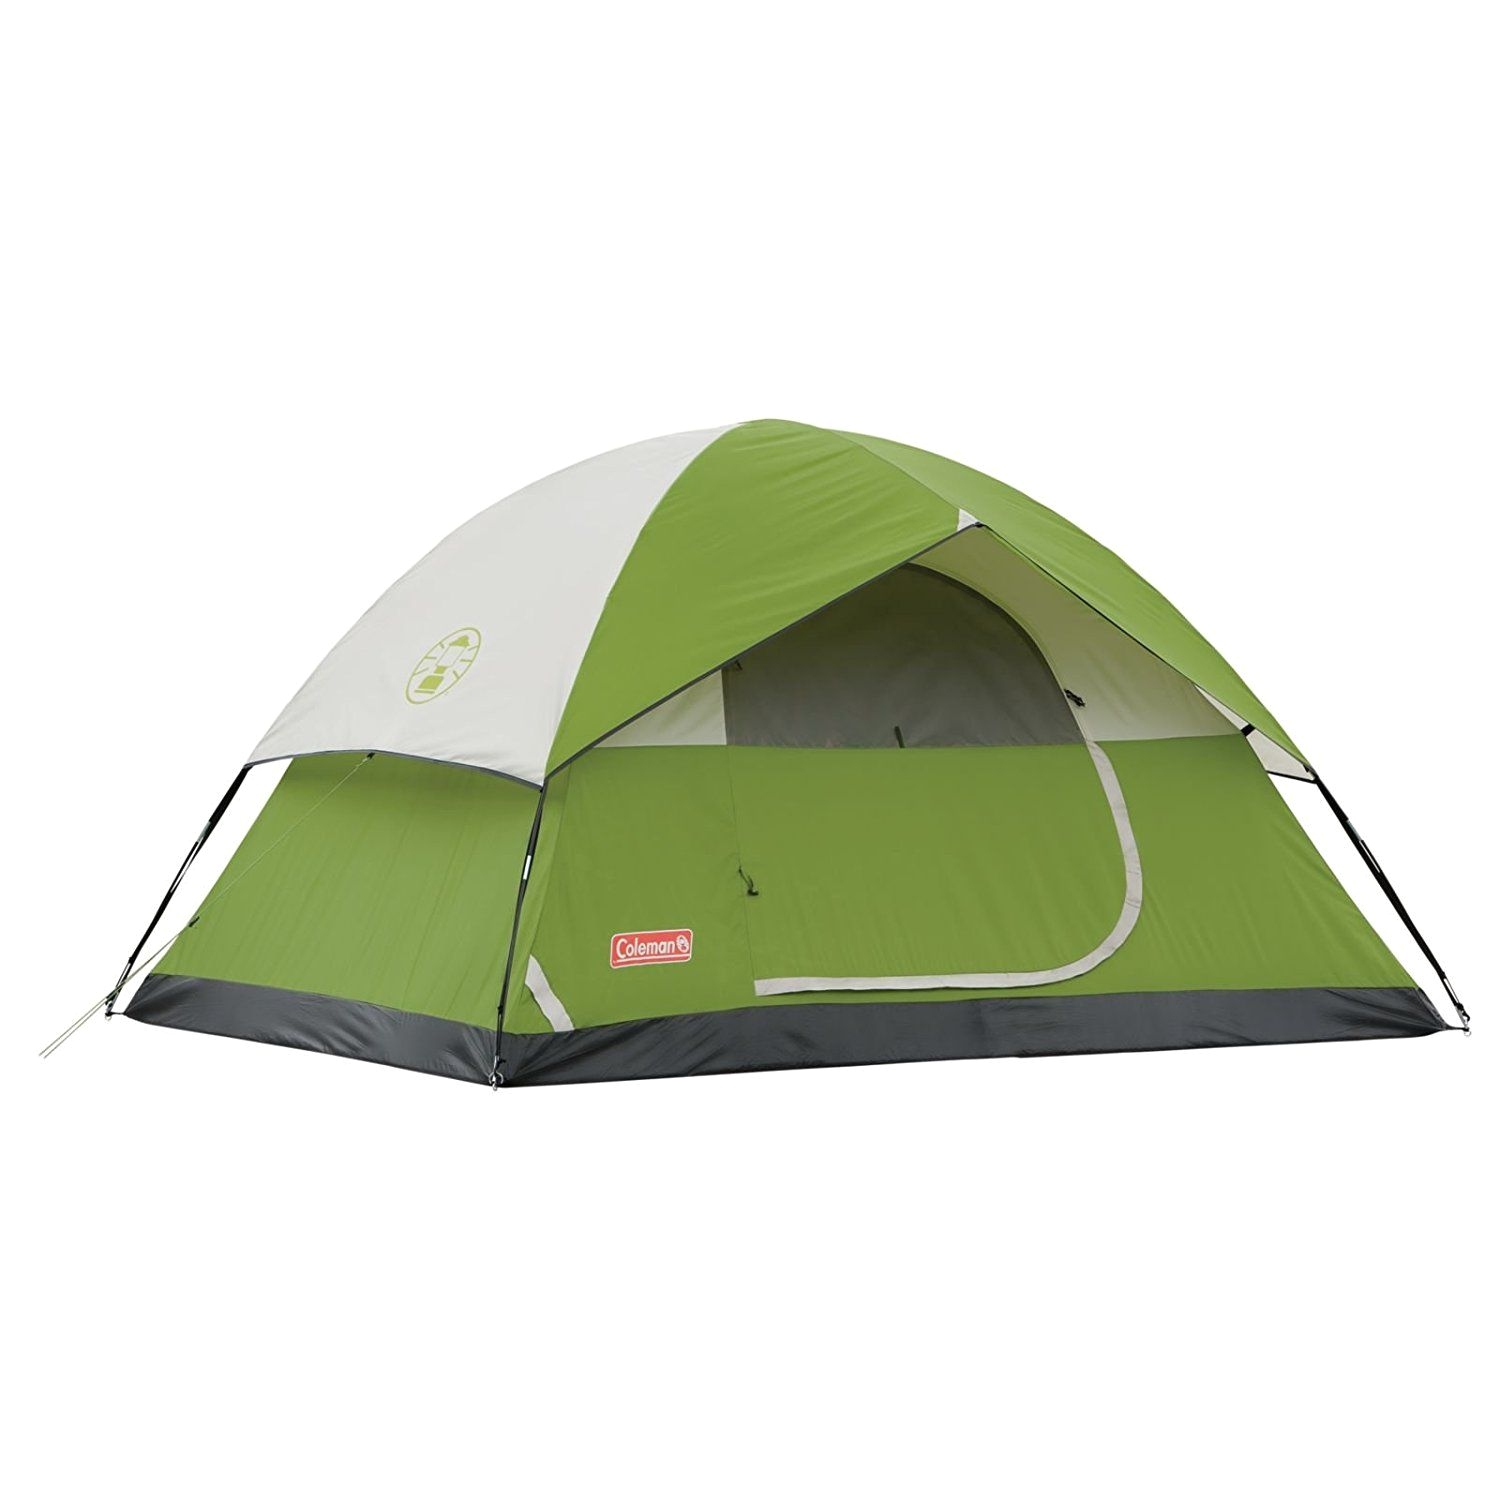 Camping Tent Flooring Options Sundome 4 Person Tent Green and Navy Color Options Check Out